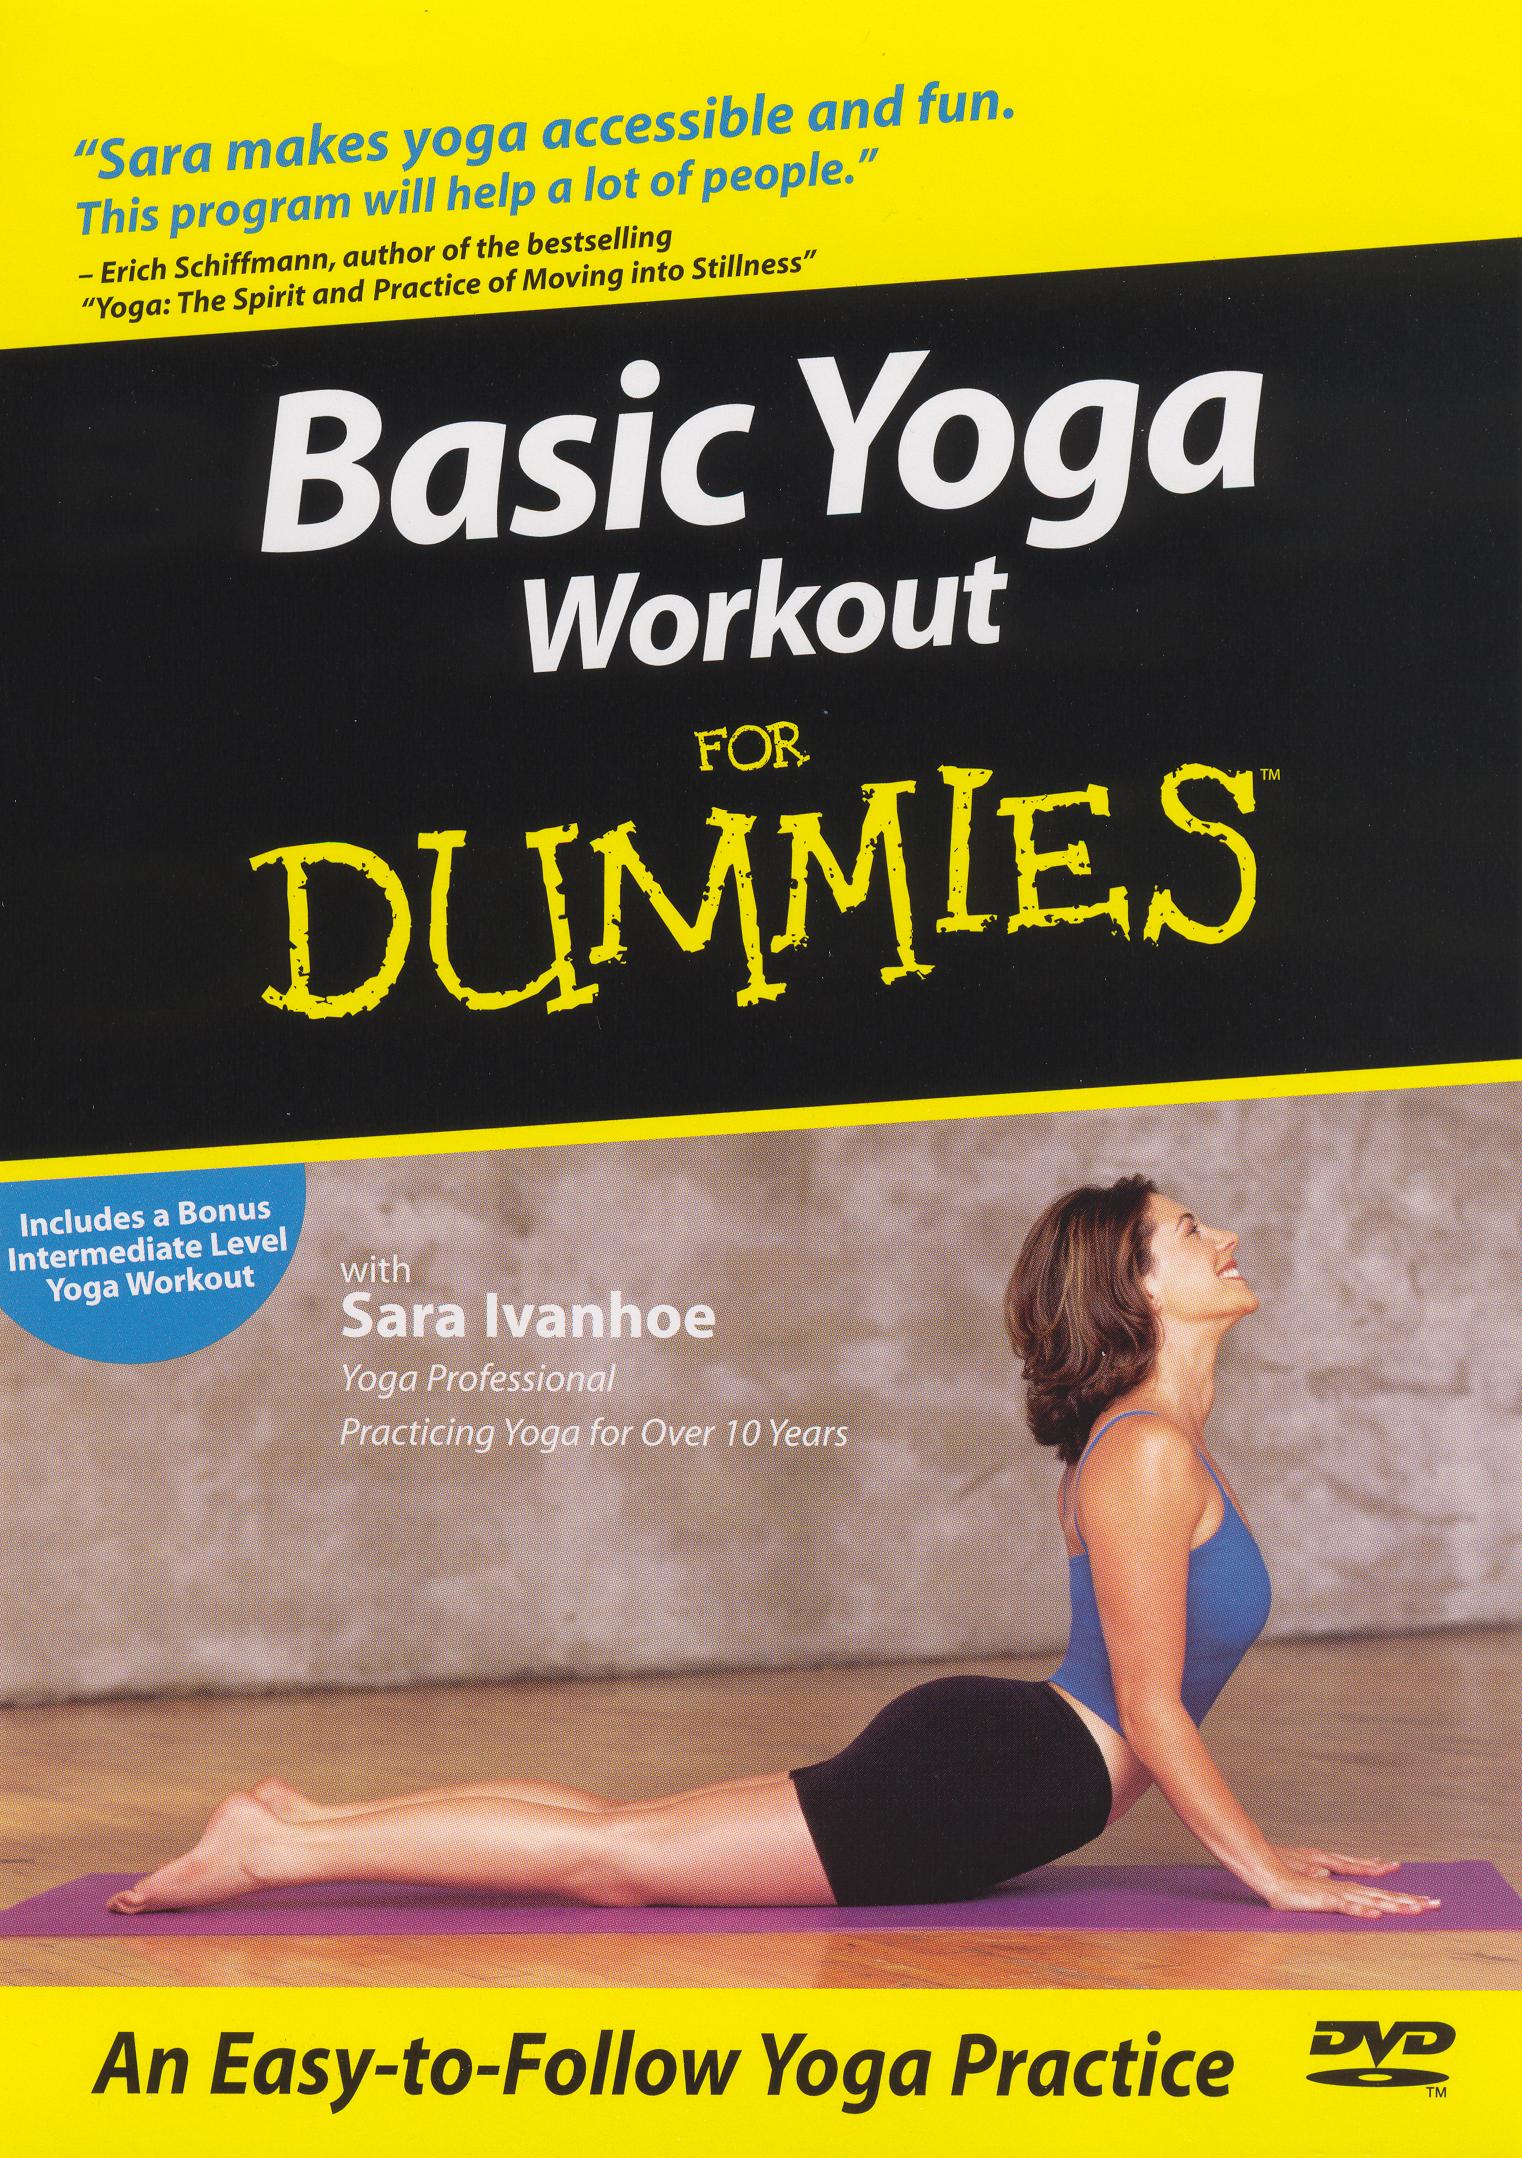 USED - LIKE NEW] Yoga Zone for Beginners Only (2-DVD set)